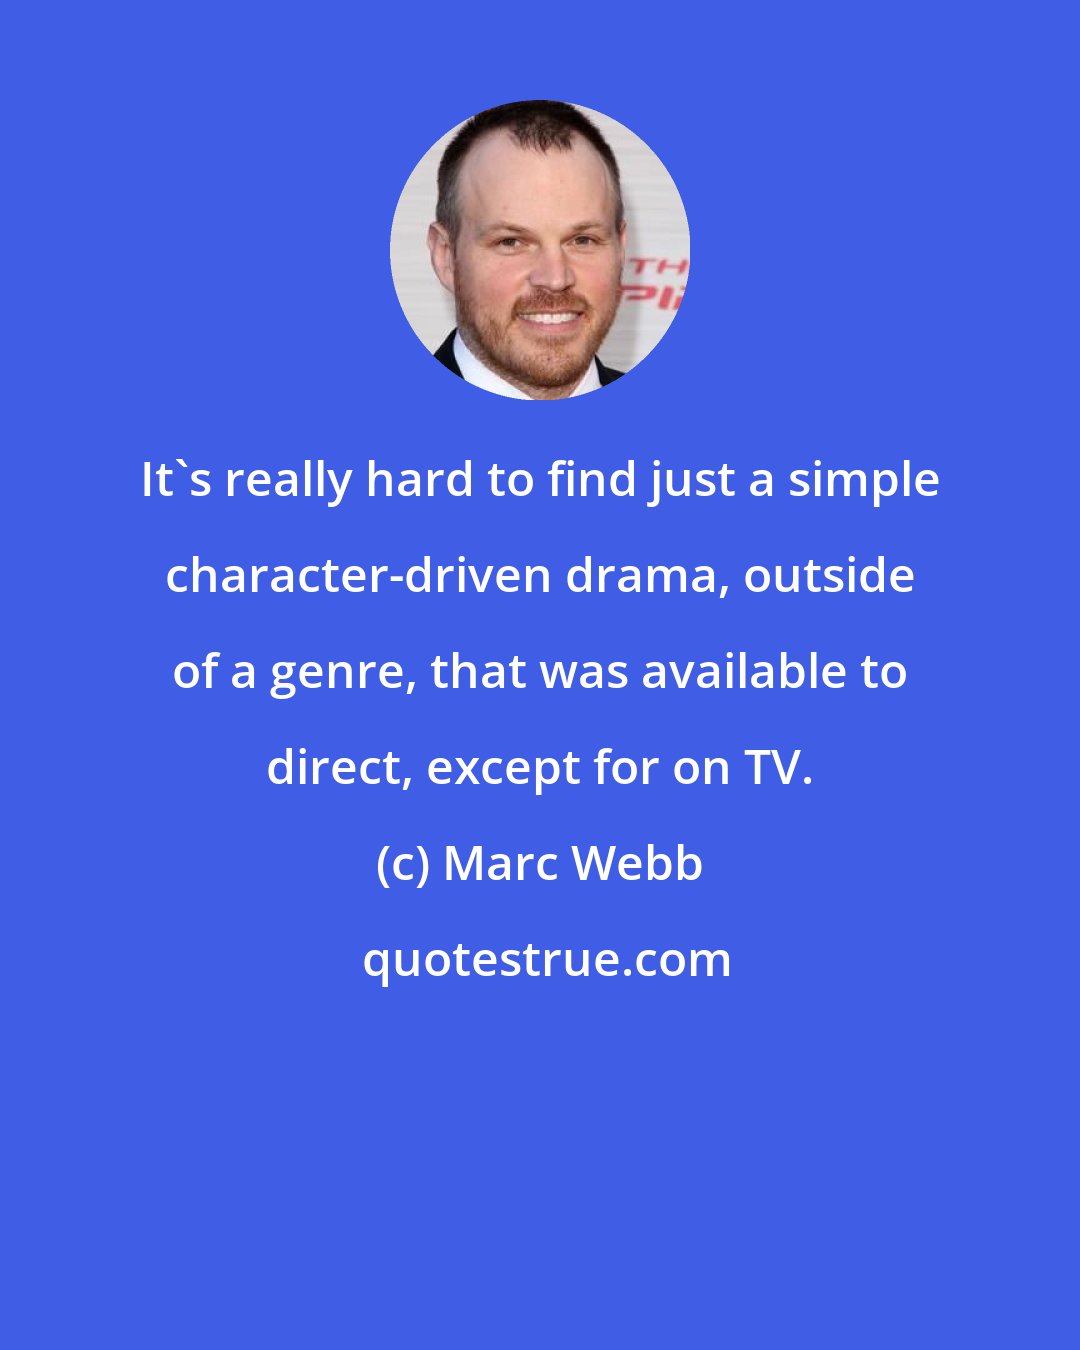 Marc Webb: It's really hard to find just a simple character-driven drama, outside of a genre, that was available to direct, except for on TV.